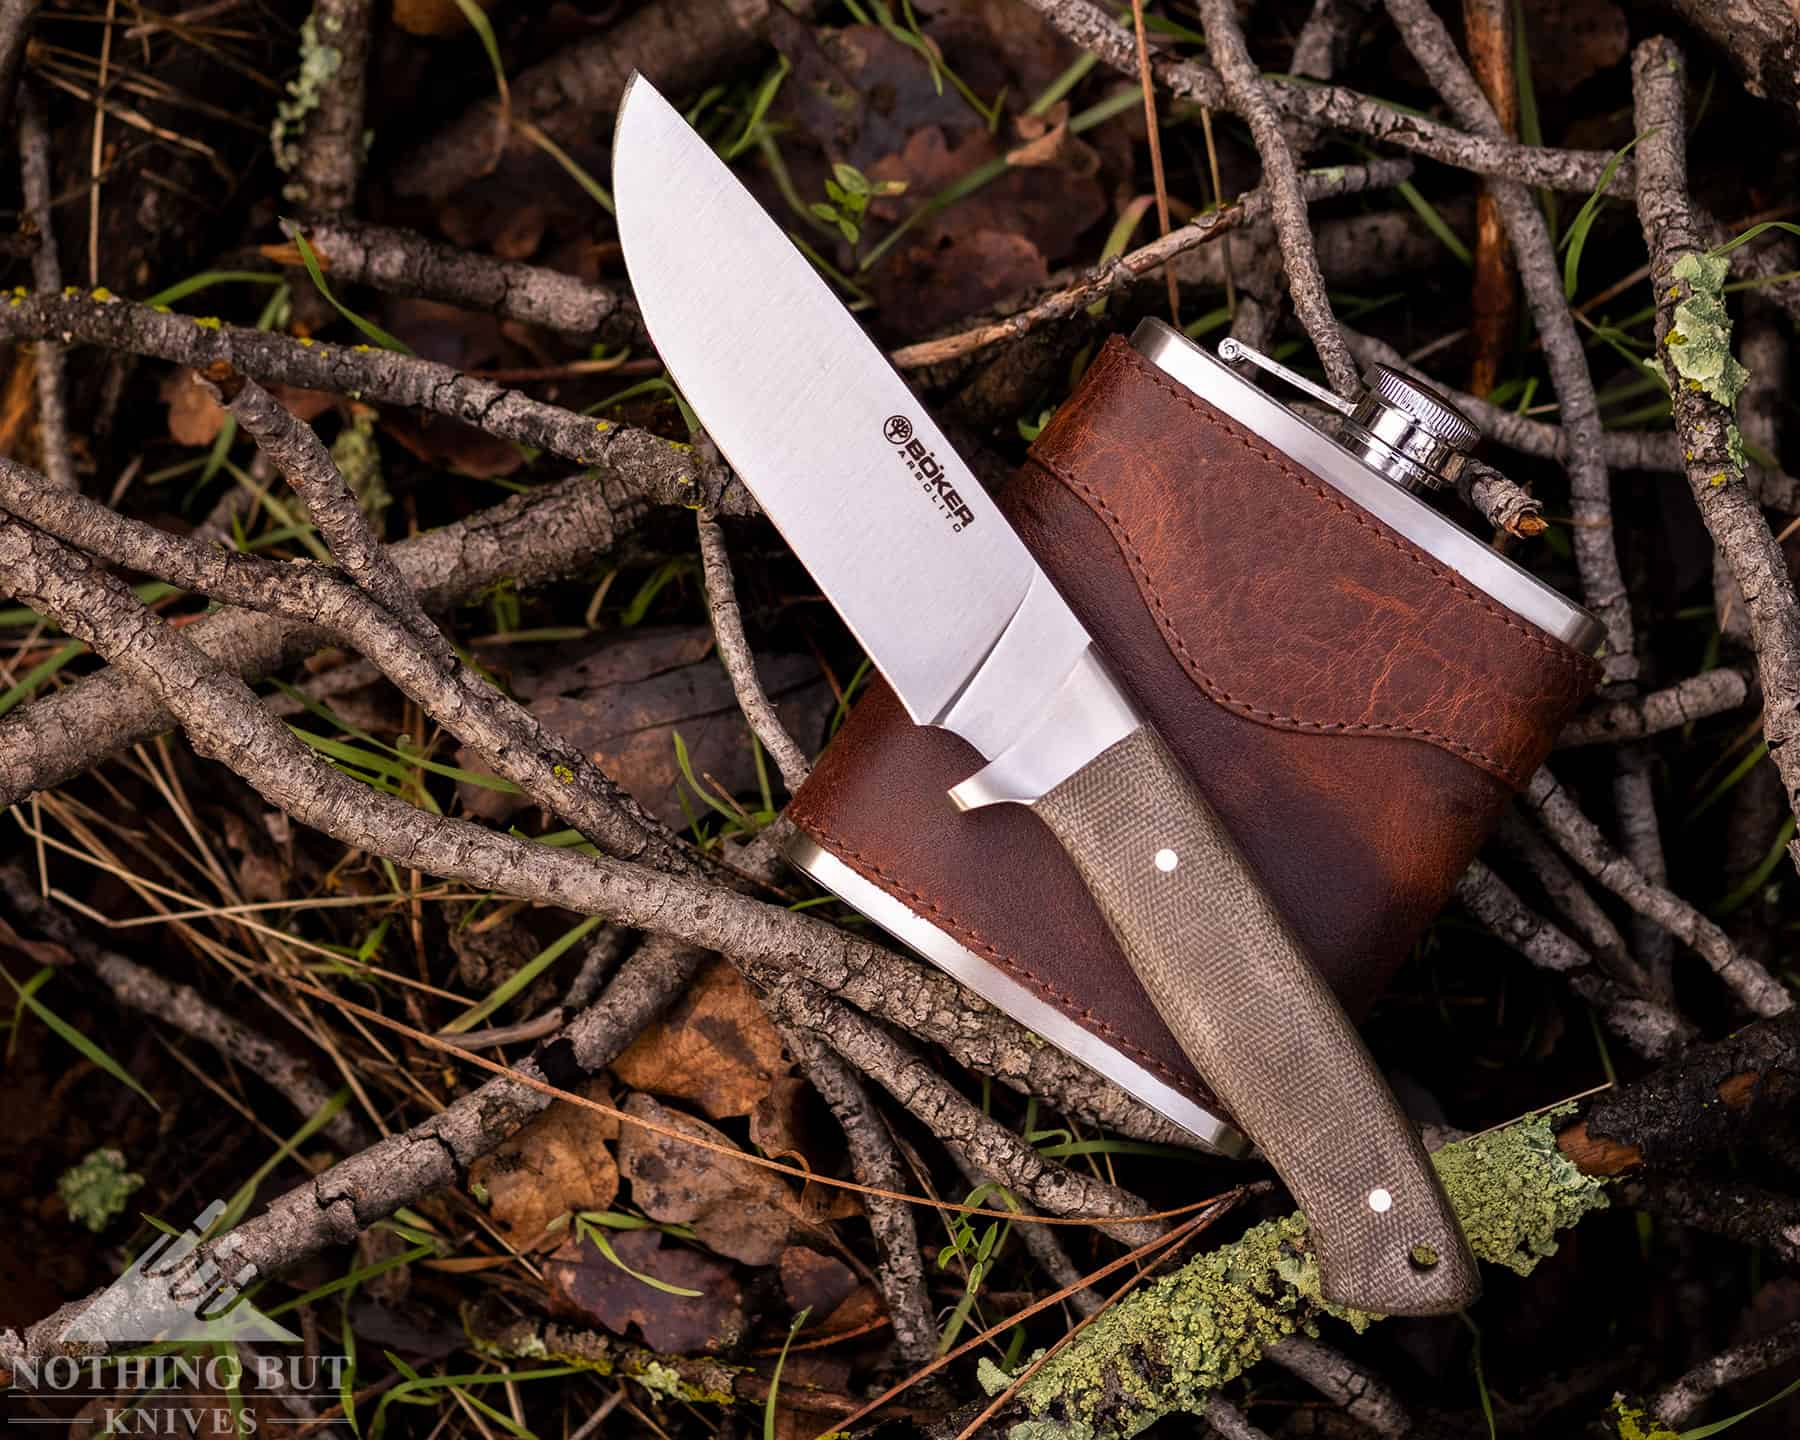 The fit and finish of the Boker Arbolito Hunter is good where it counts.